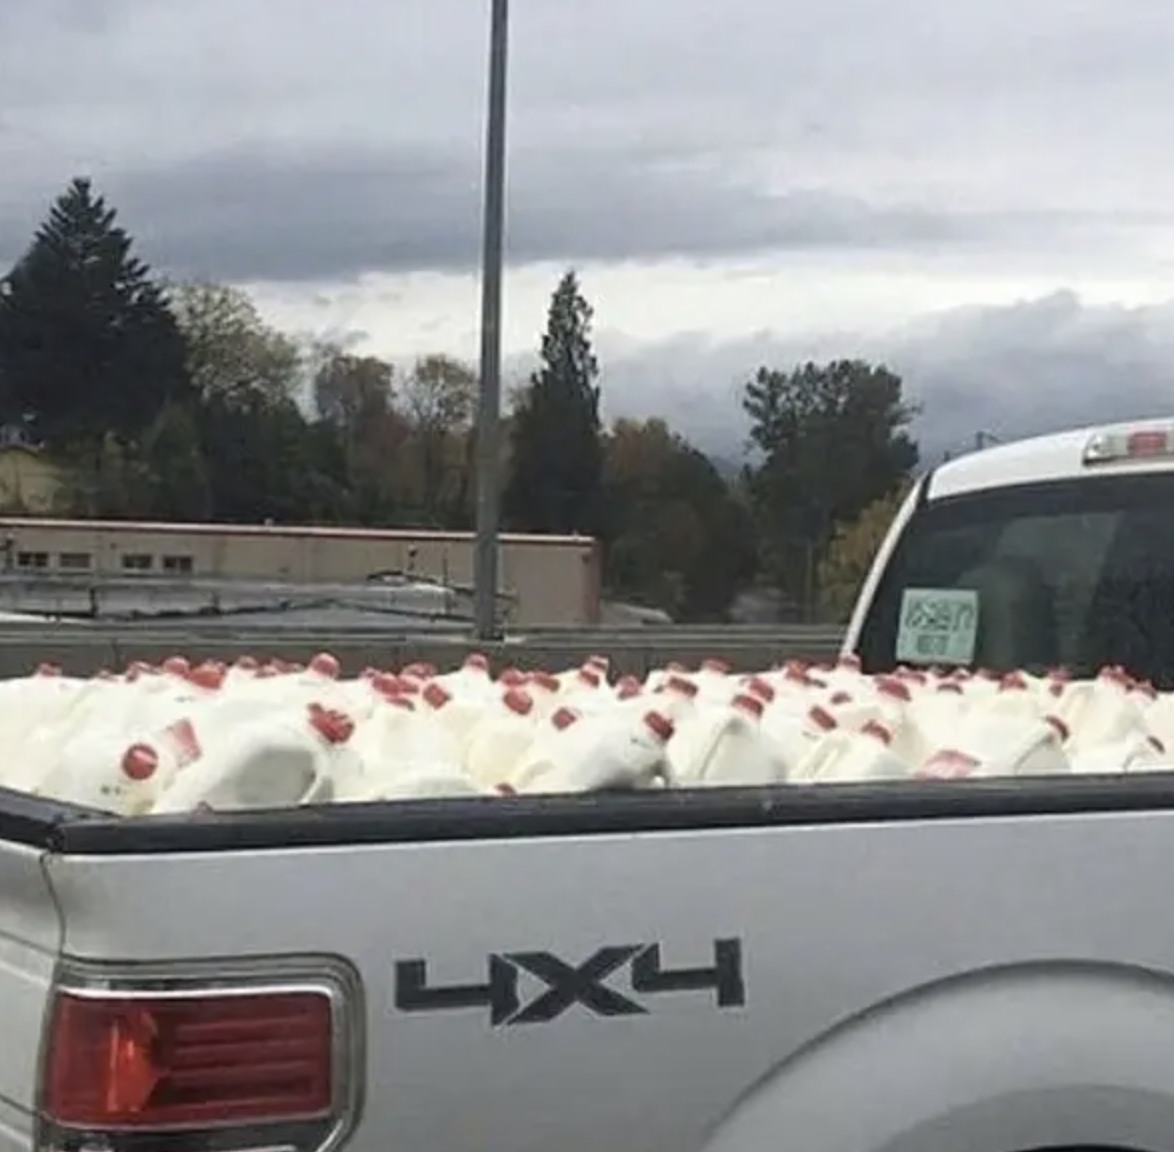 Truck bed filled with numerous gallon milk jugs, overcast sky in the background